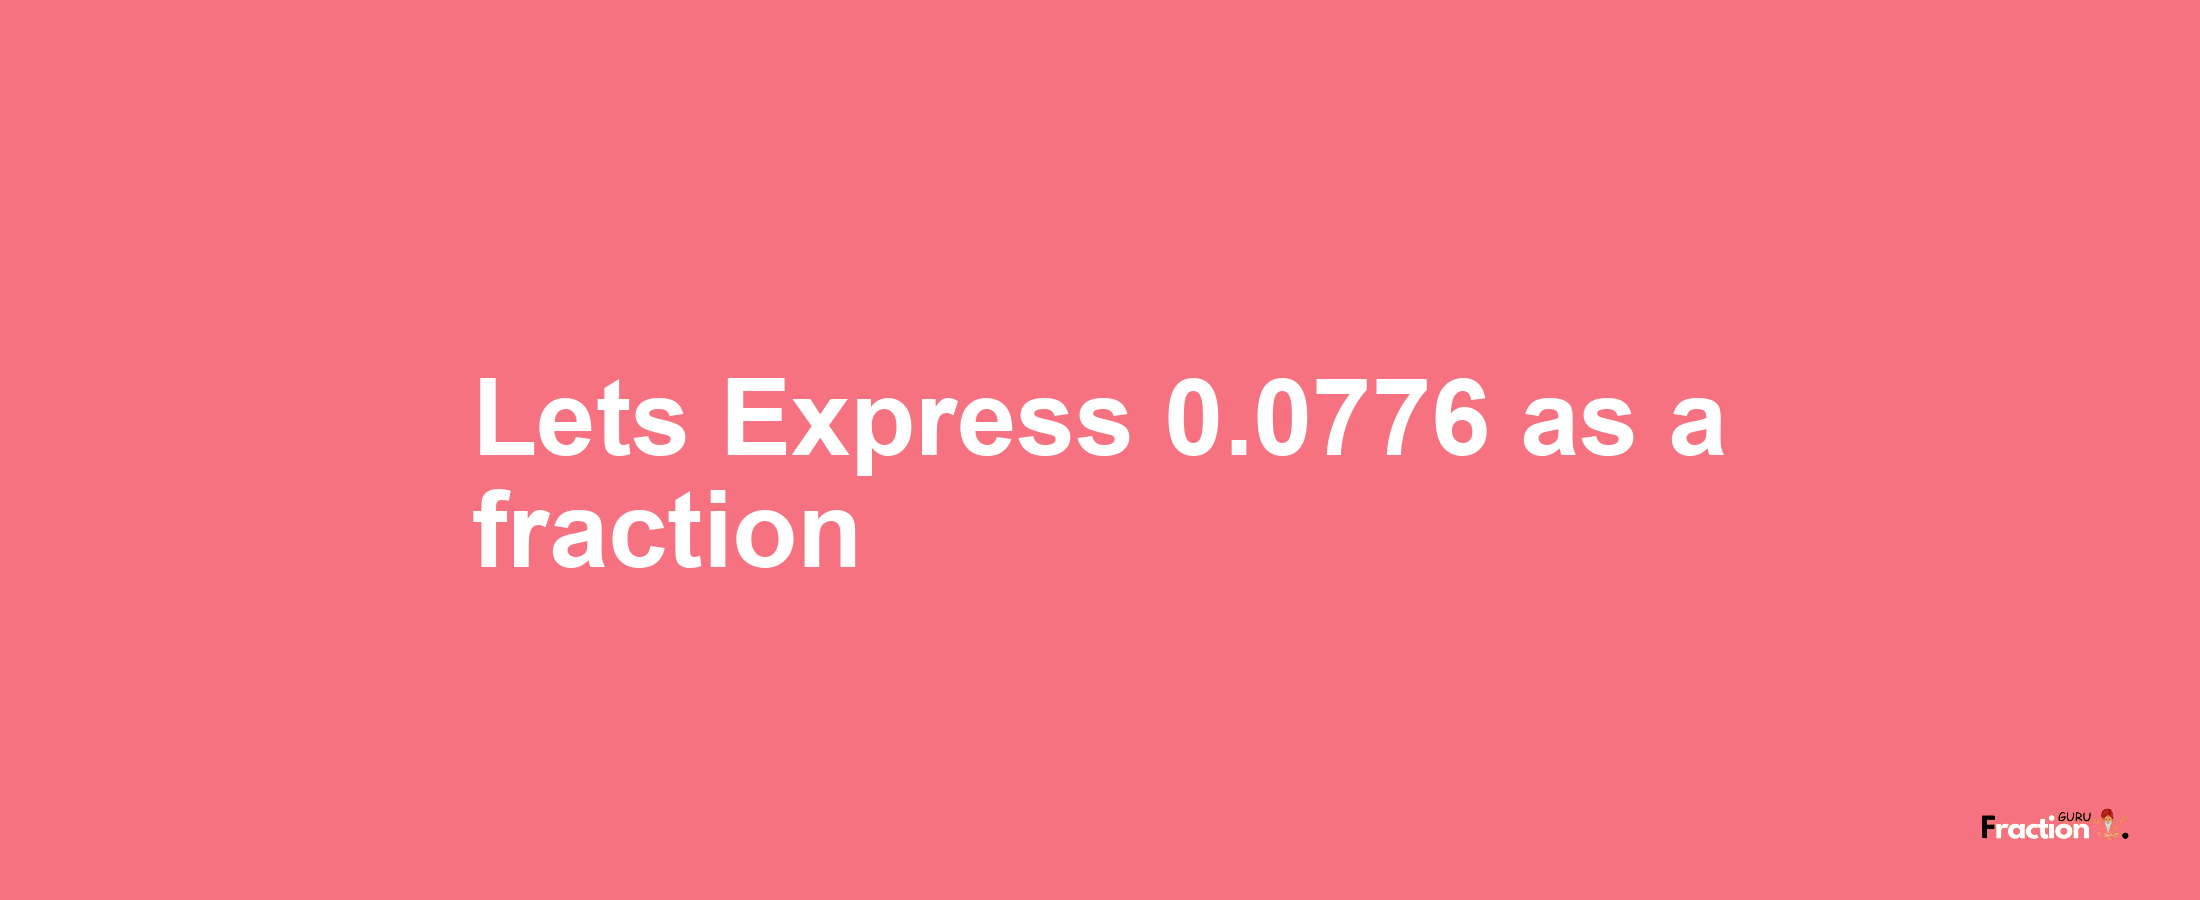 Lets Express 0.0776 as afraction